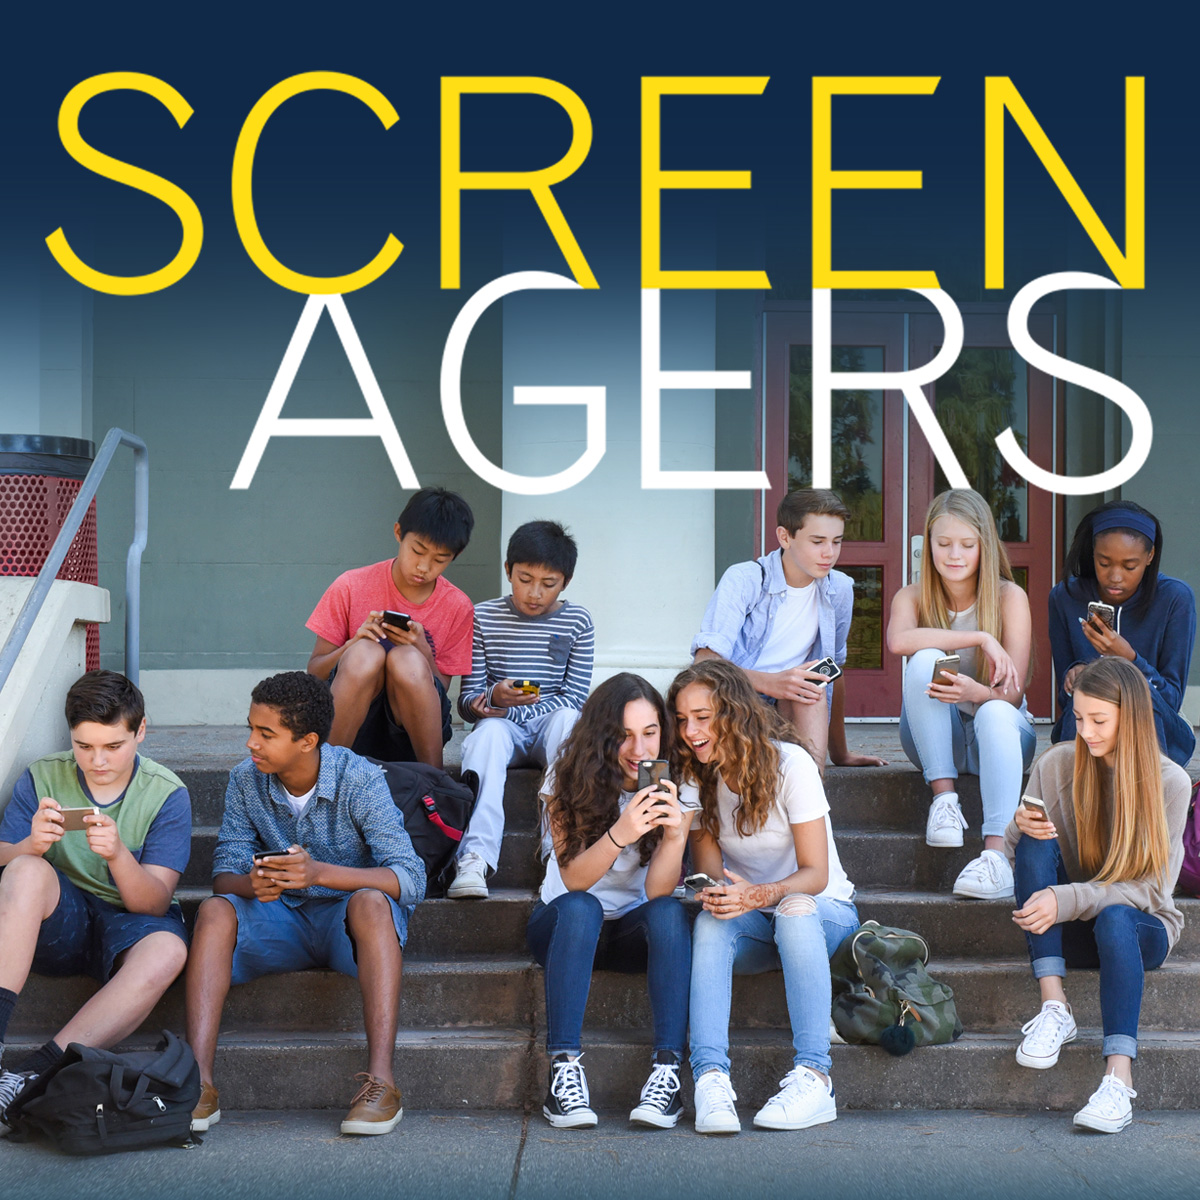 Screenagers Movie | Growing up in the digital age